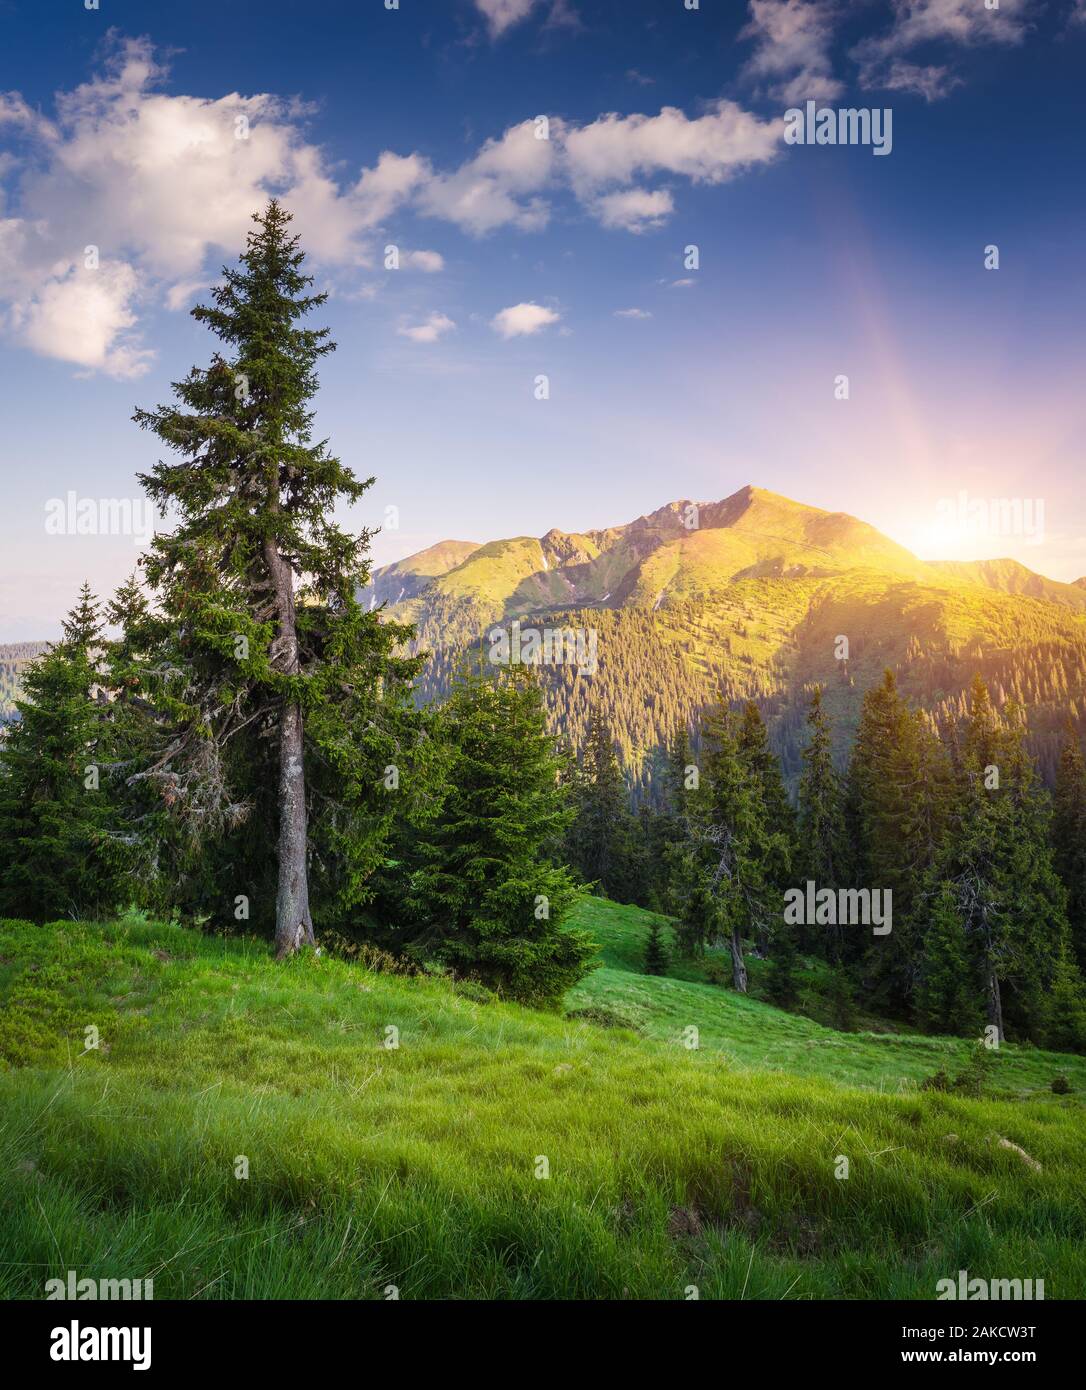 Spruce tree on a hillside near a pine forest. Summer landscape in the mountains. Sun over the mountain ridge. Morning light. Karpaty, Ukraine, Europe Stock Photo